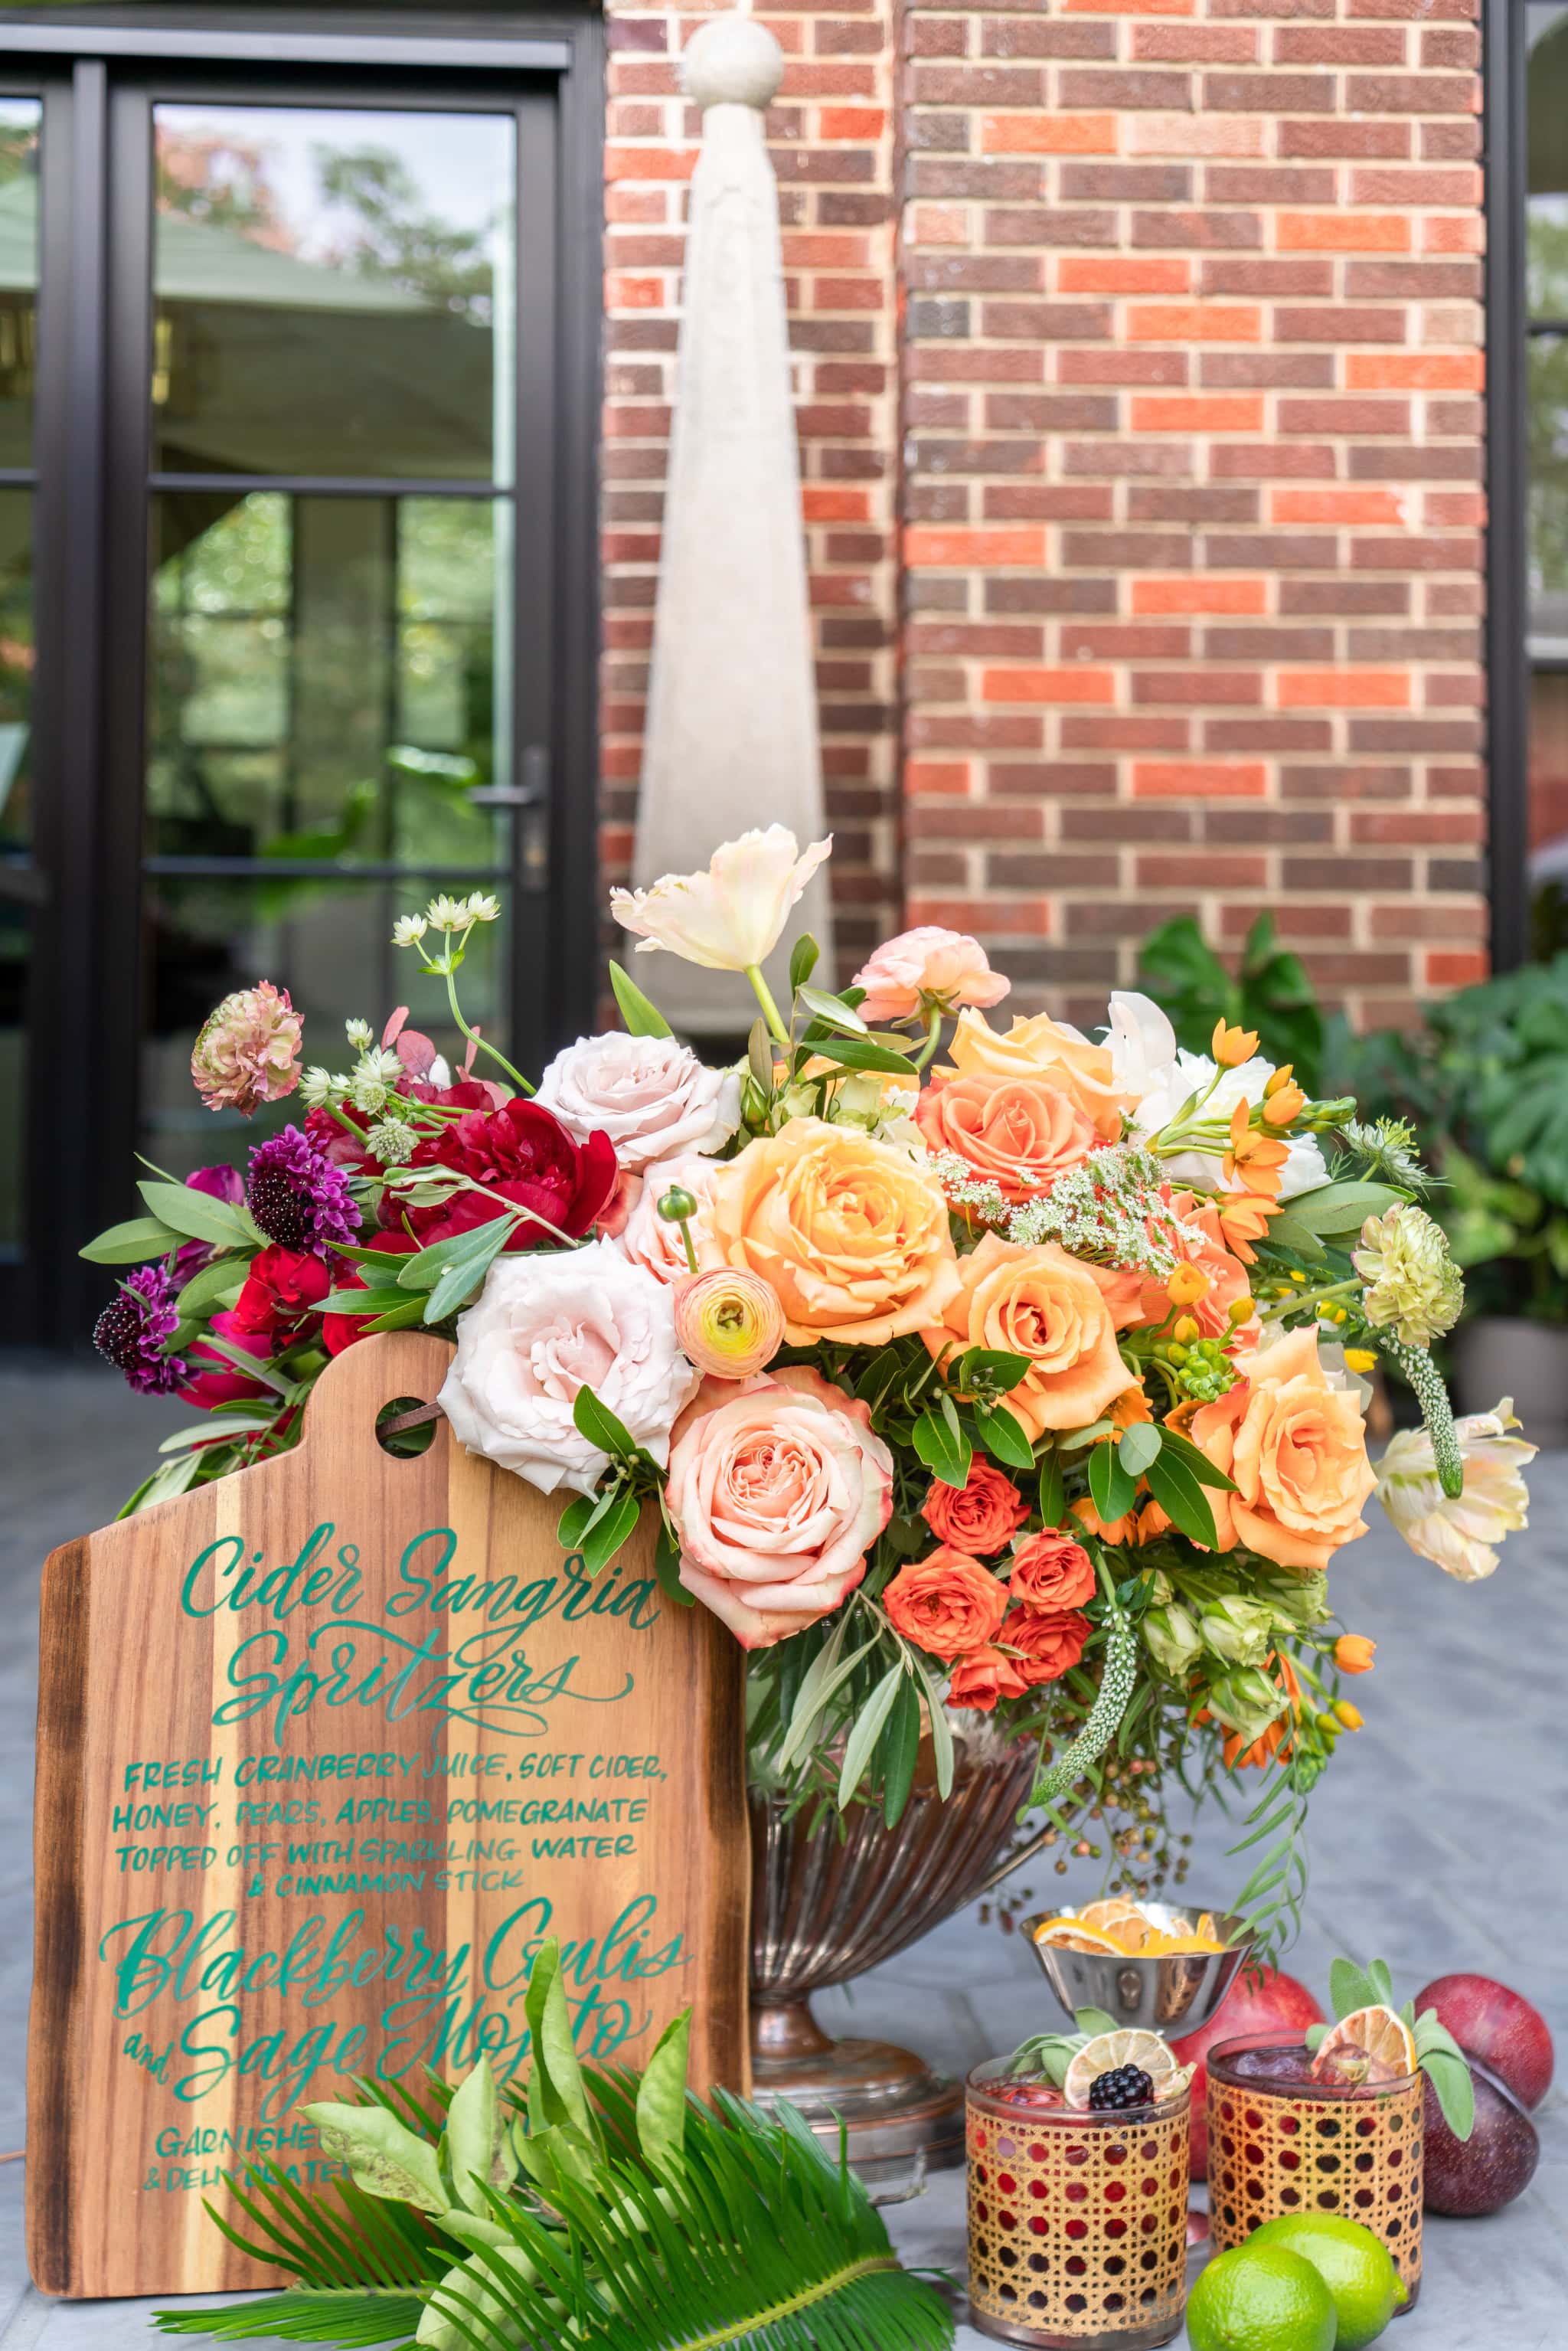 A beautiful bouquet designed by Joybox Flowers, one of our partners at Laura U Design Collective